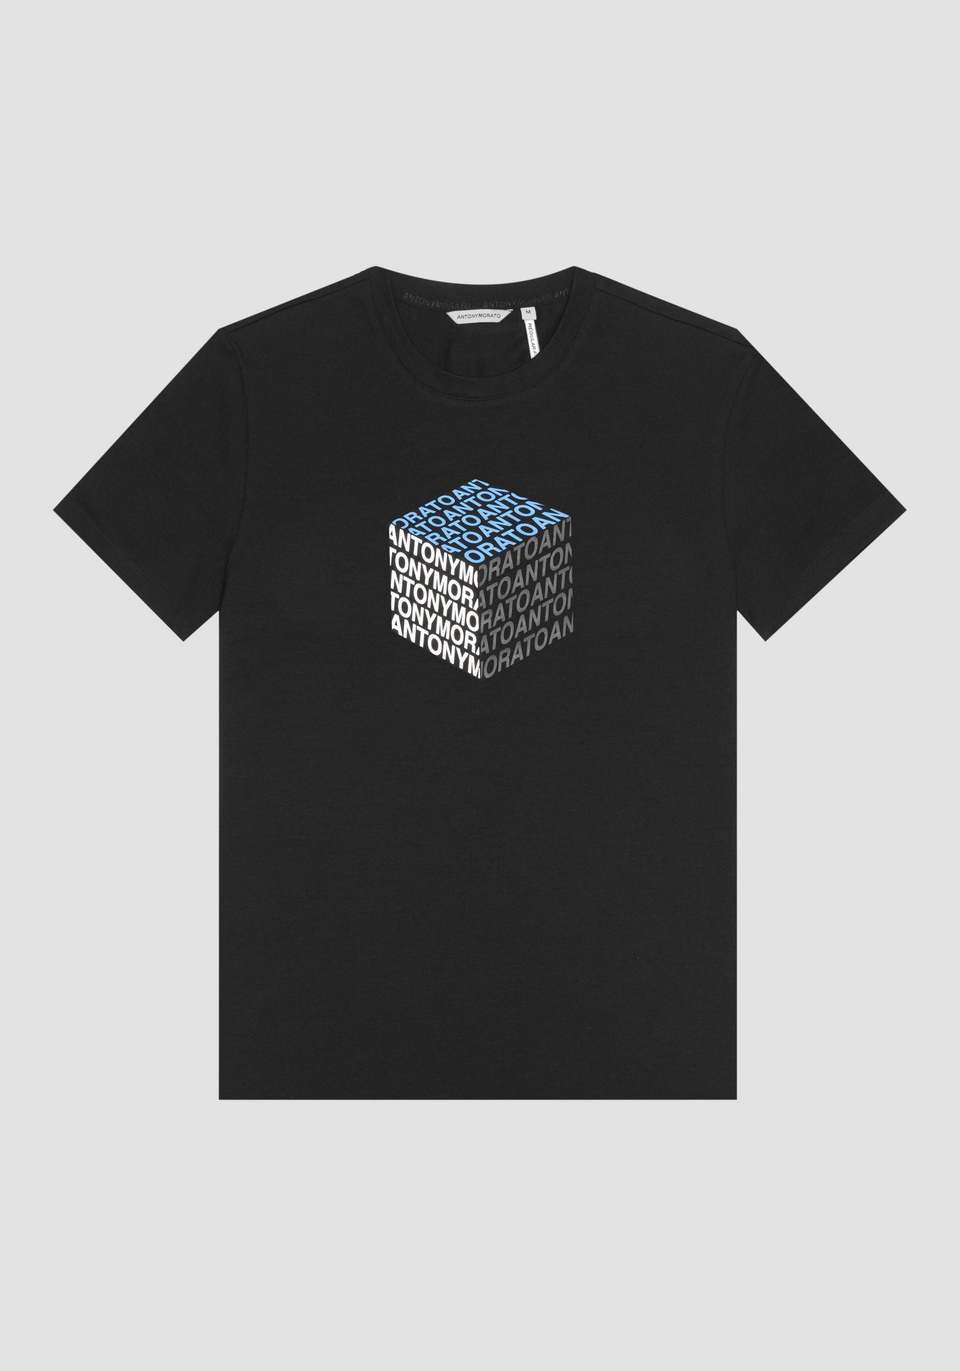 REGULAR FIT T-SHIRT IN COTTON WITH CUBE LOGO PRINT AND INJECTION MOLDED RUBBER PRINT - Antony Morato Online Shop